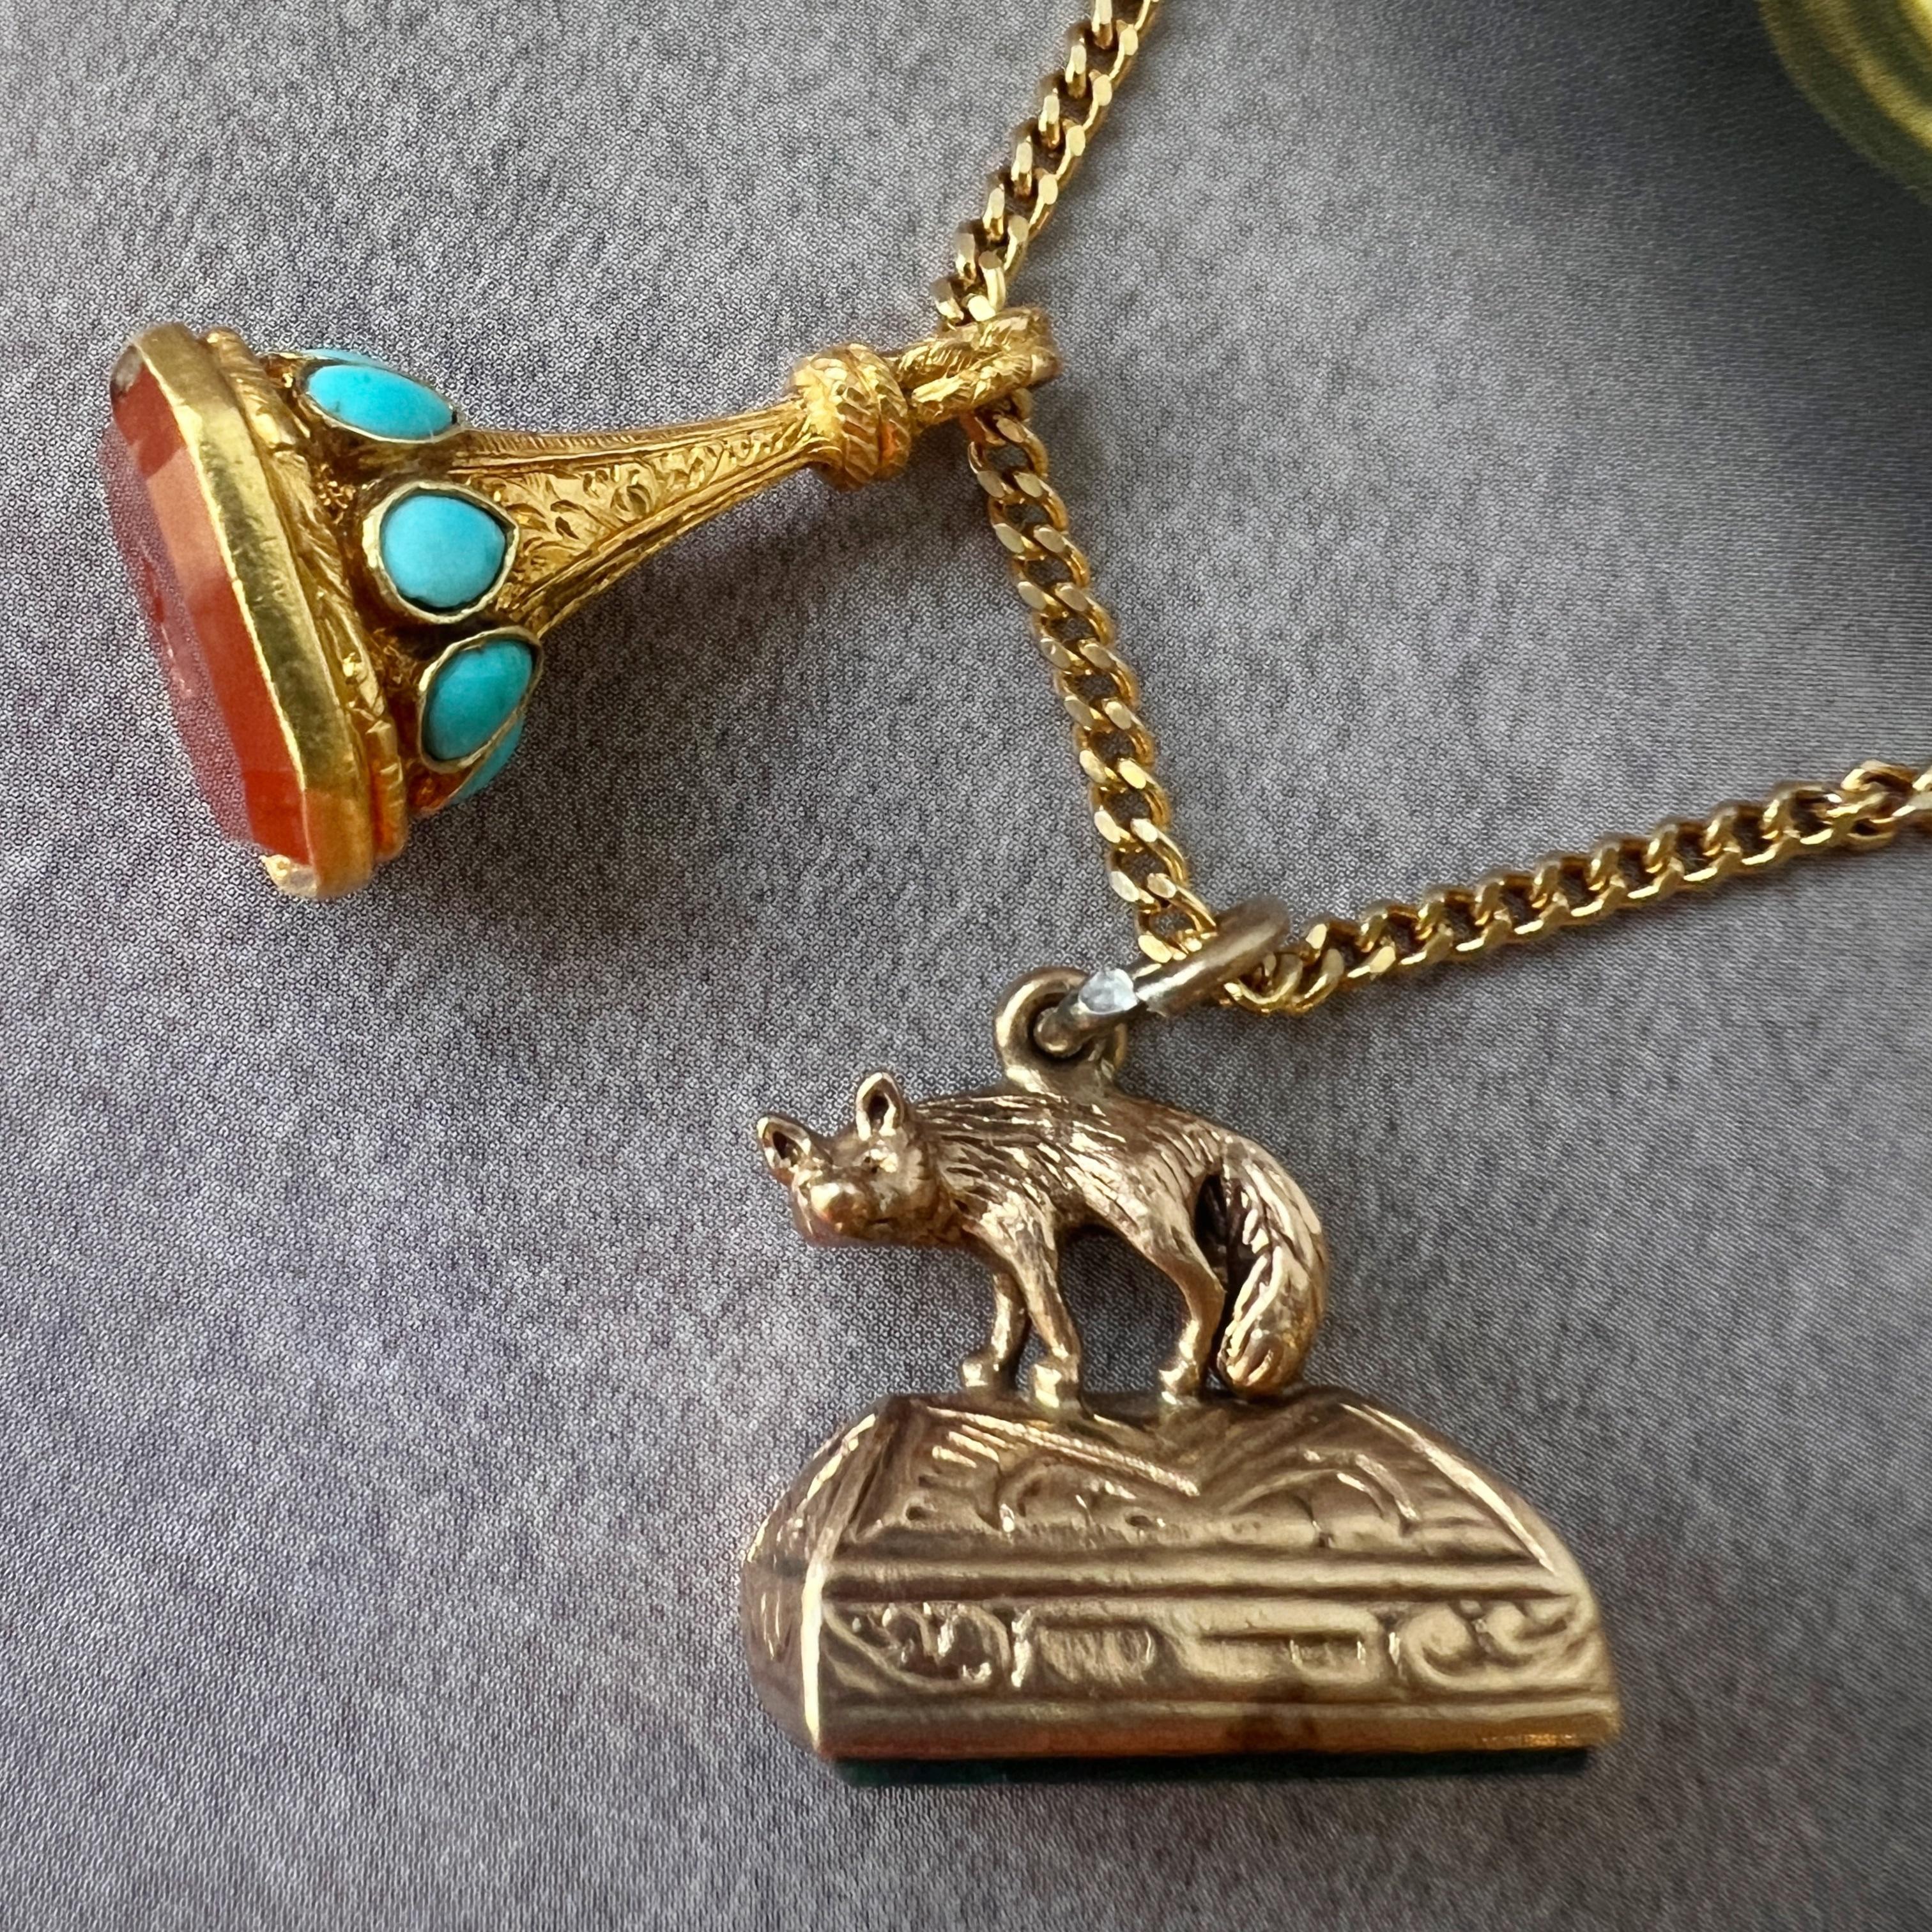 Antique 18K gold turquoise carnelian seal fob pendant “as free as a leaf” For Sale 6